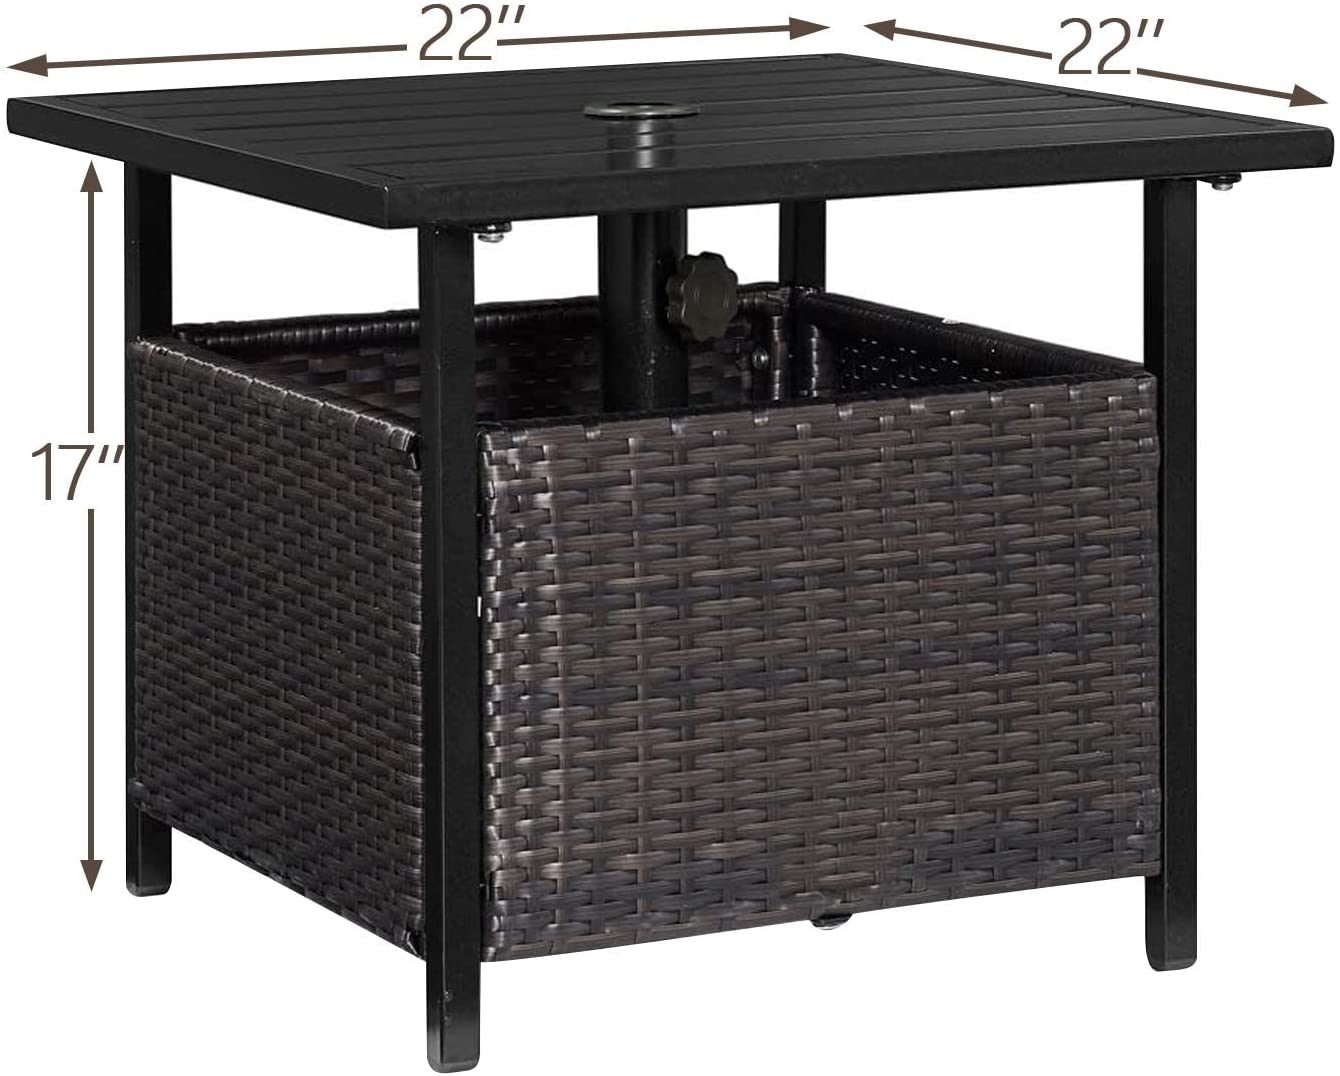 Outdoor Wicker Umbrella Side Table Patio Rattan Stand Table with Umbrella Hole